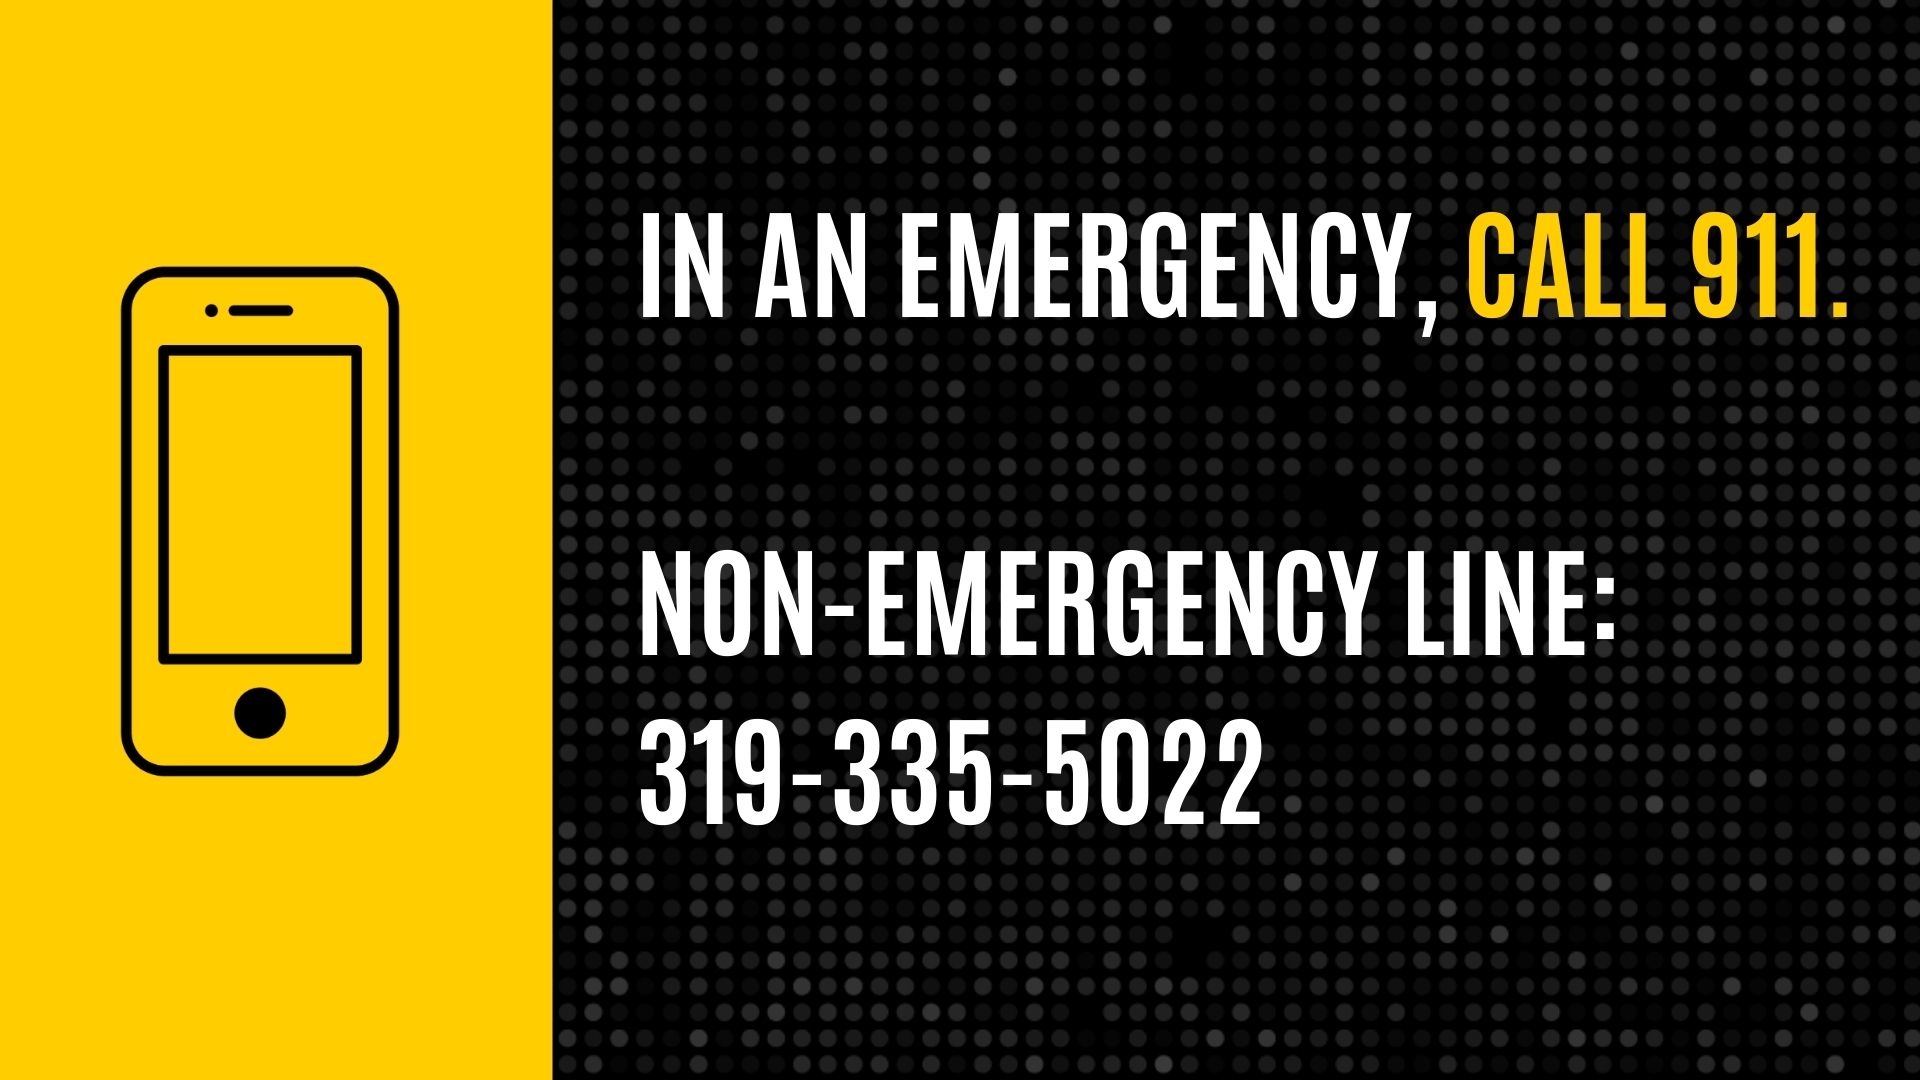 In an emergency, call 911. Non-emergency line: 319-335-5022